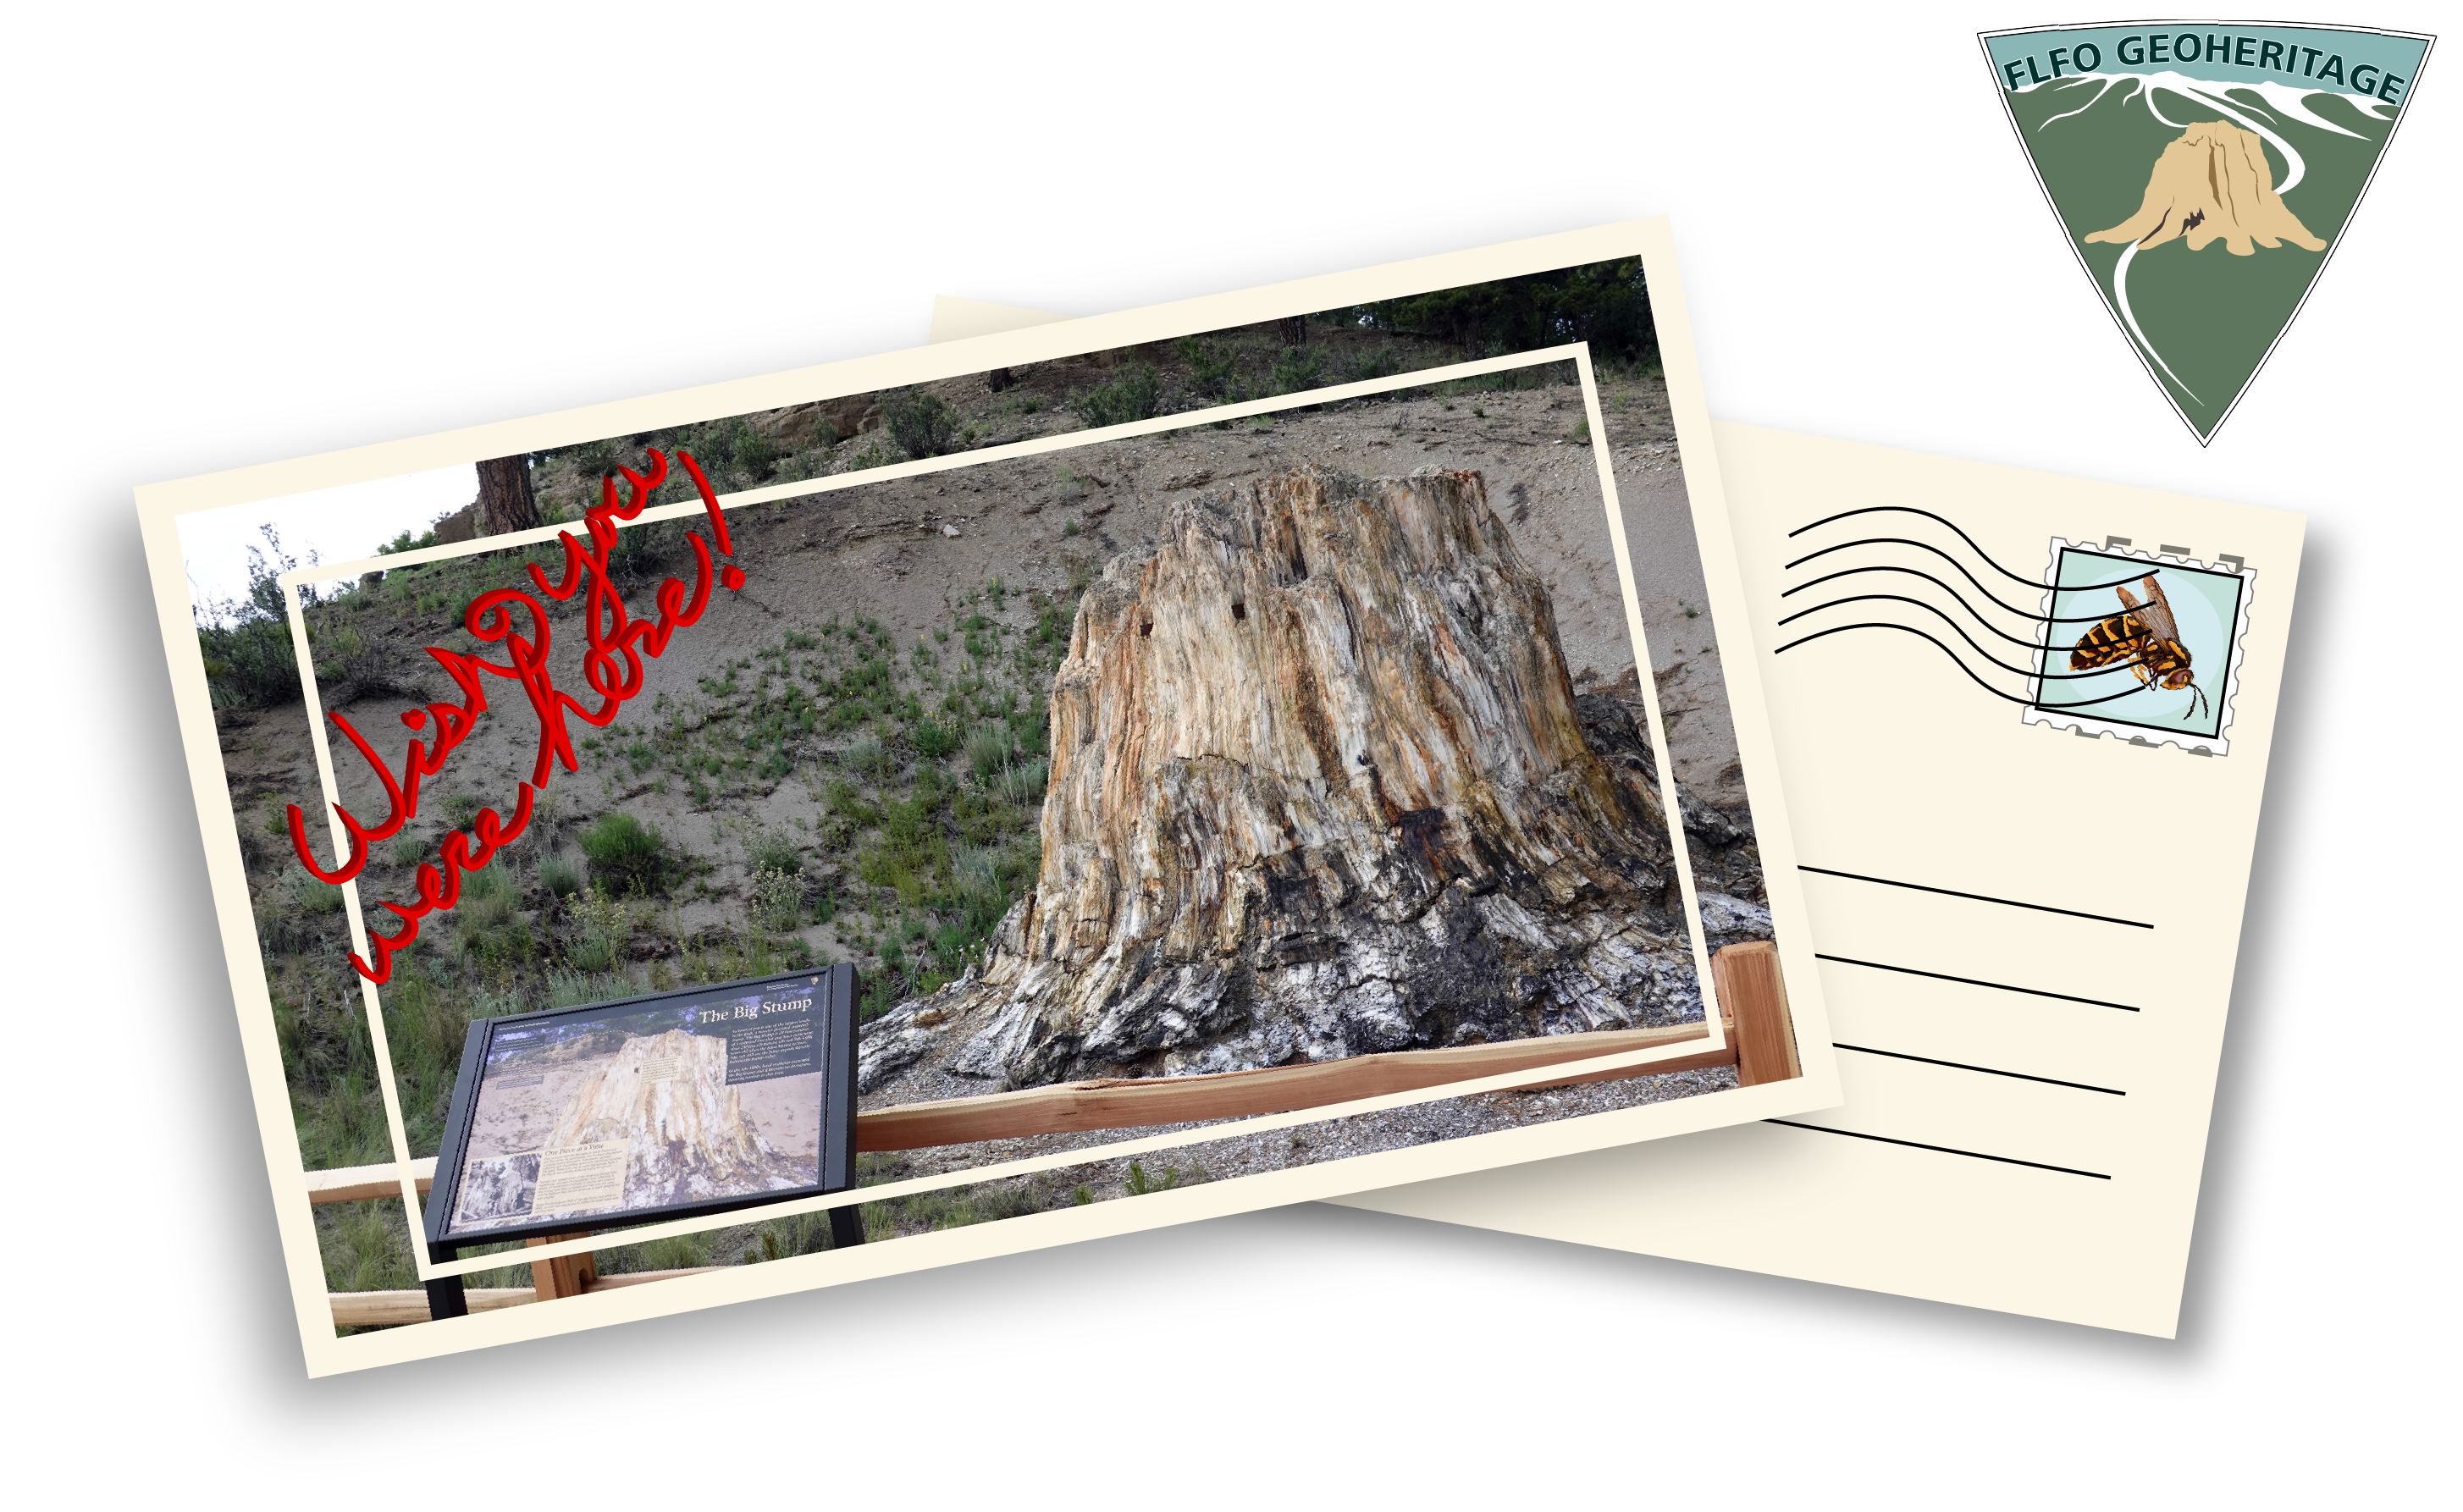 An image of a postcard with a wayside in the foreground before a large petrified redwood stump.